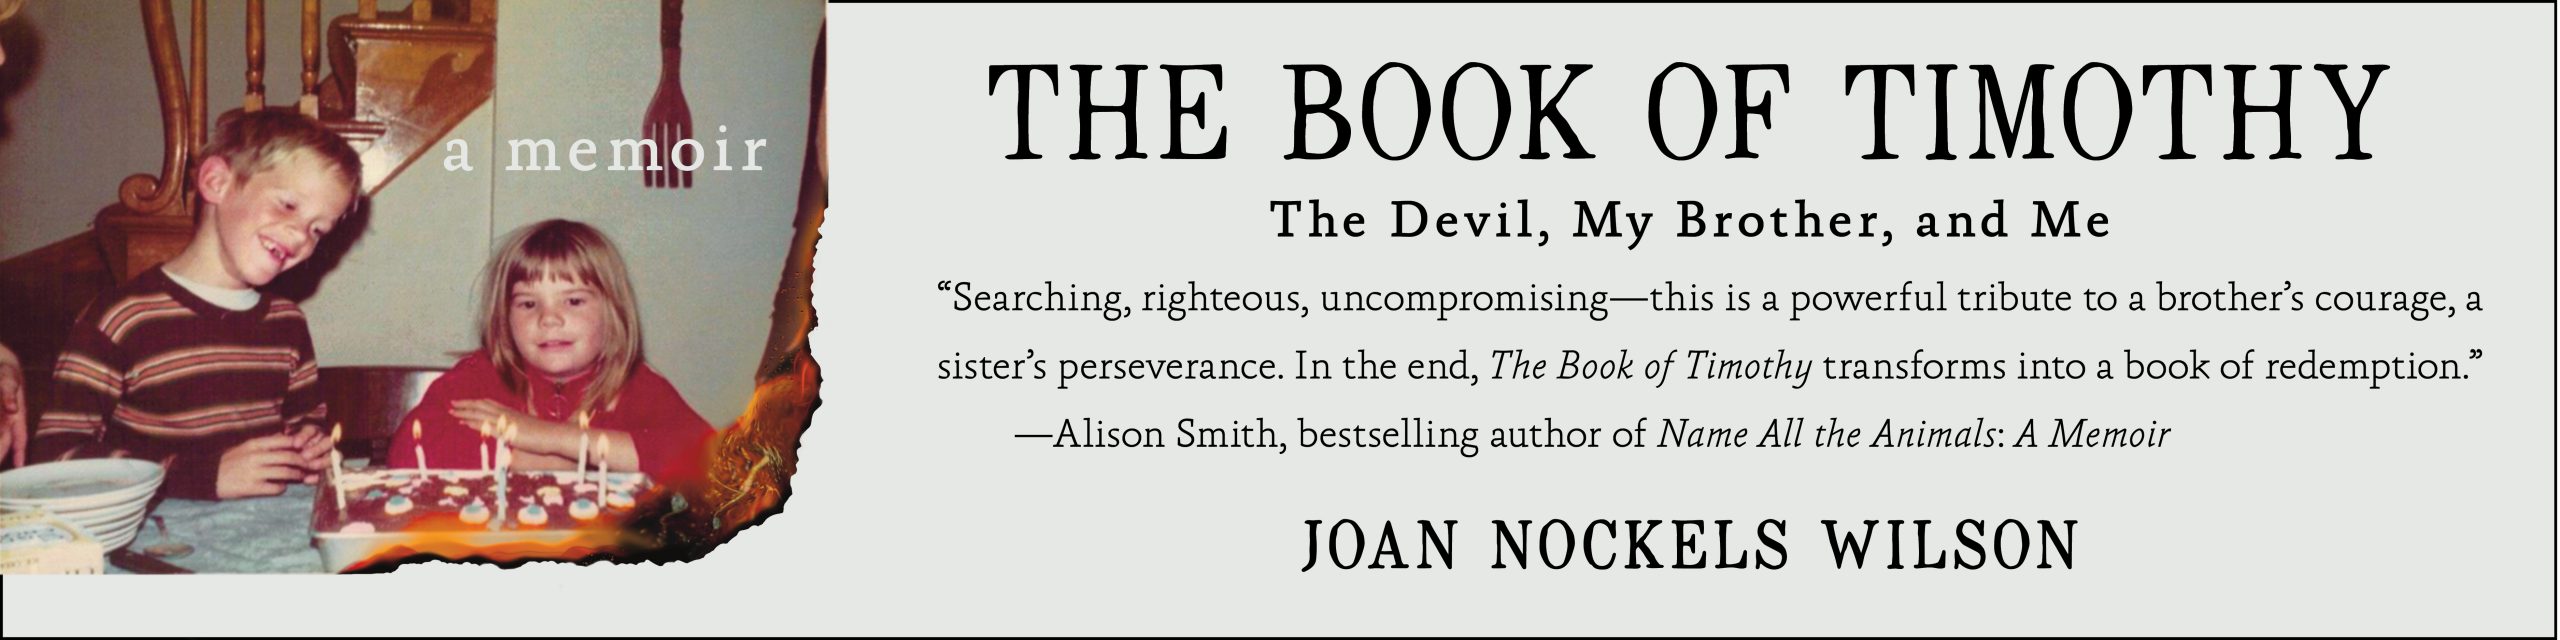 Promotional banner highlighting The Book of Timothy: The Devil, My Brother, and Me, a memoir by Joan Nockels Wilson